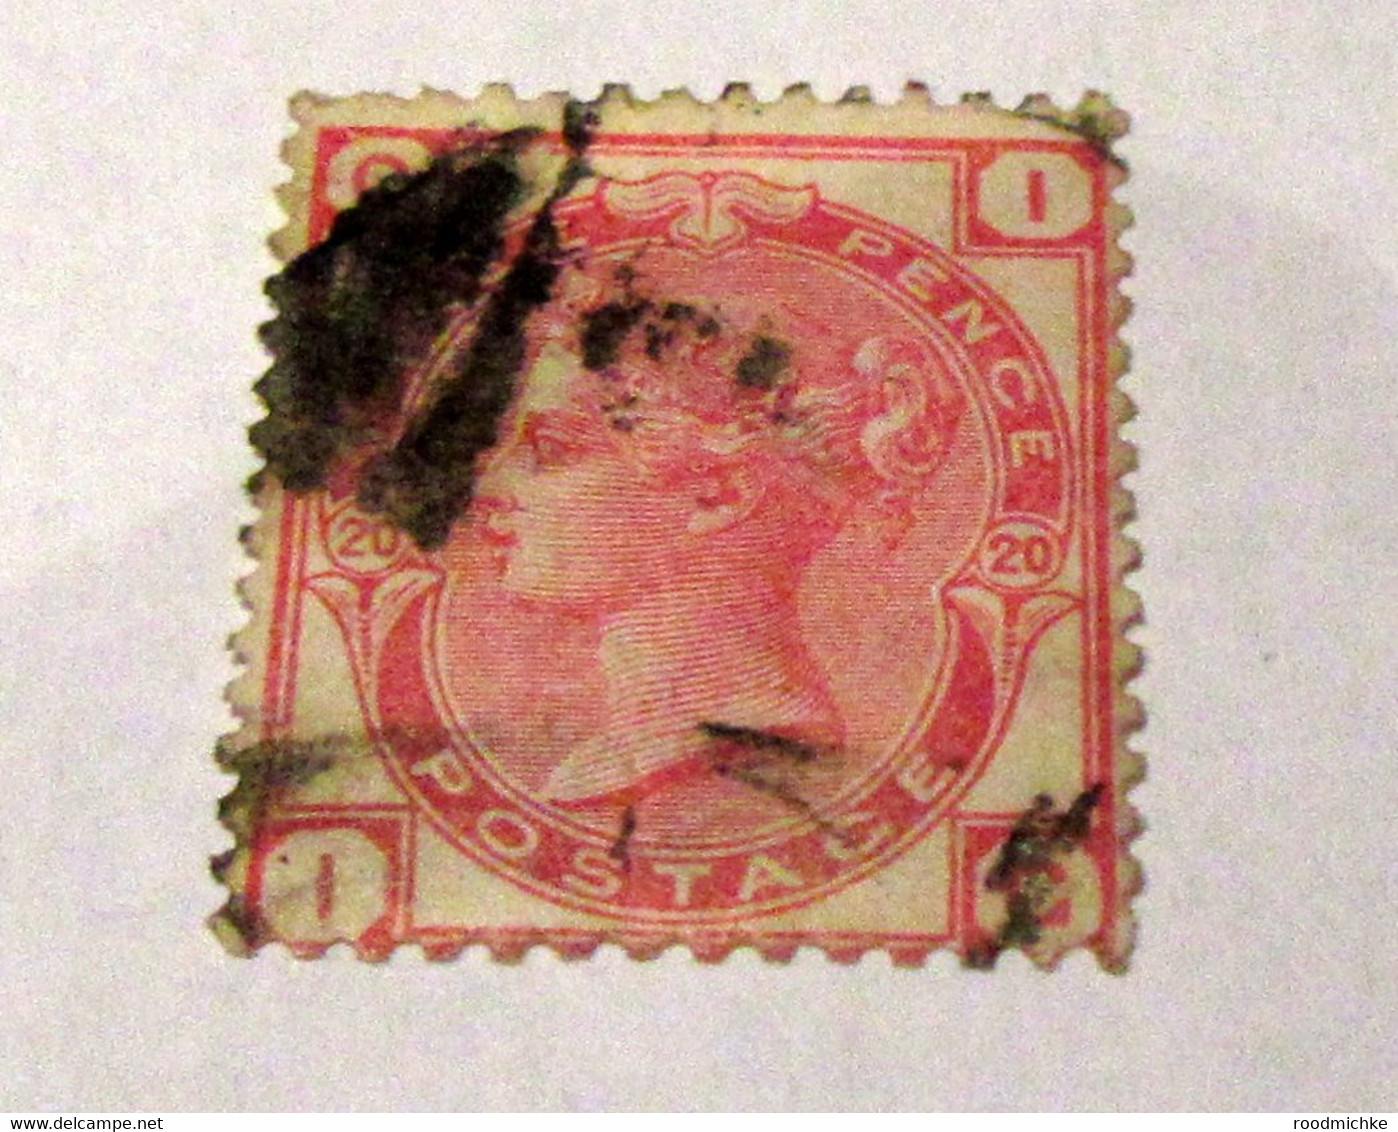 QUEEN VICTORIA SG 143 PLATE 20  USED - Unclassified